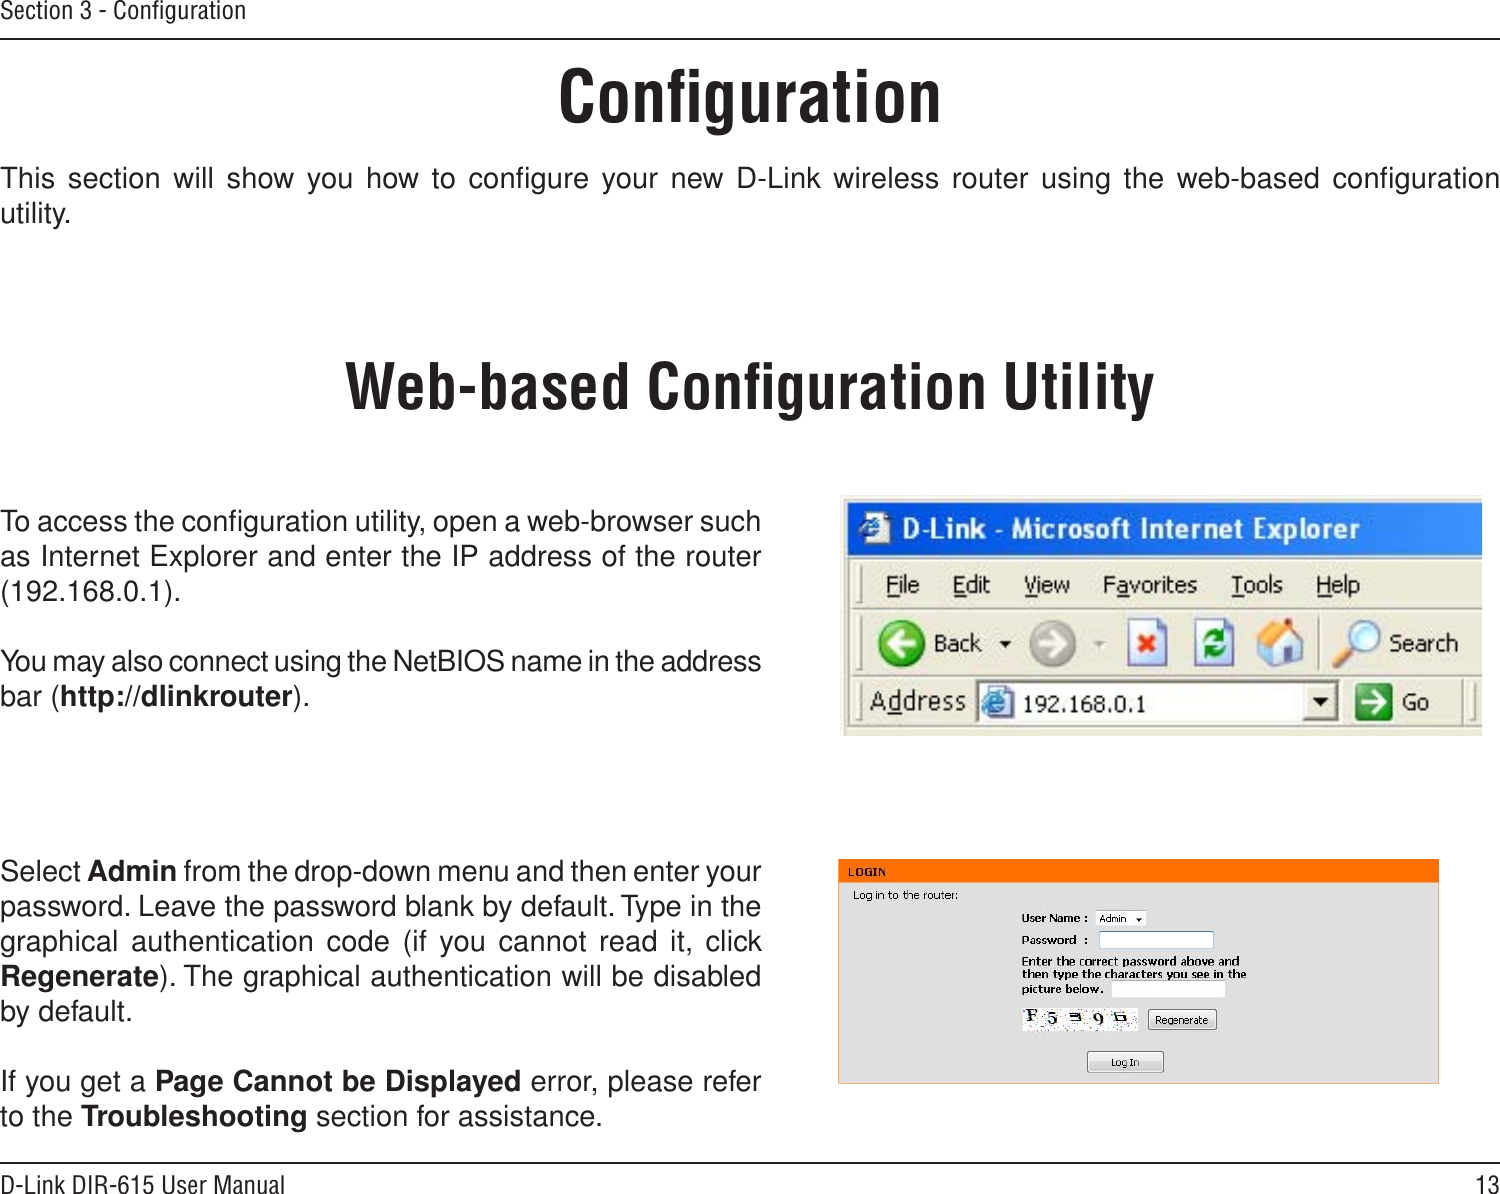 13D-Link DIR-615 User ManualSection 3 - ConﬁgurationConﬁgurationThis section will show you  how to conﬁgure your new D-Link wireless router using  the web-based conﬁguration utility.Web-based Conﬁguration UtilityTo access the conﬁguration utility, open a web-browser such as Internet Explorer and enter the IP address of the router (192.168.0.1).You may also connect using the NetBIOS name in the address bar (http://dlinkrouter).Select Admin from the drop-down menu and then enter your password. Leave the password blank by default. Type in the graphical  authentication code (if you cannot read it, click Regenerate). The graphical authentication will be disabled by default.If you get a Page Cannot be Displayed error, please refer to the Troubleshooting section for assistance.